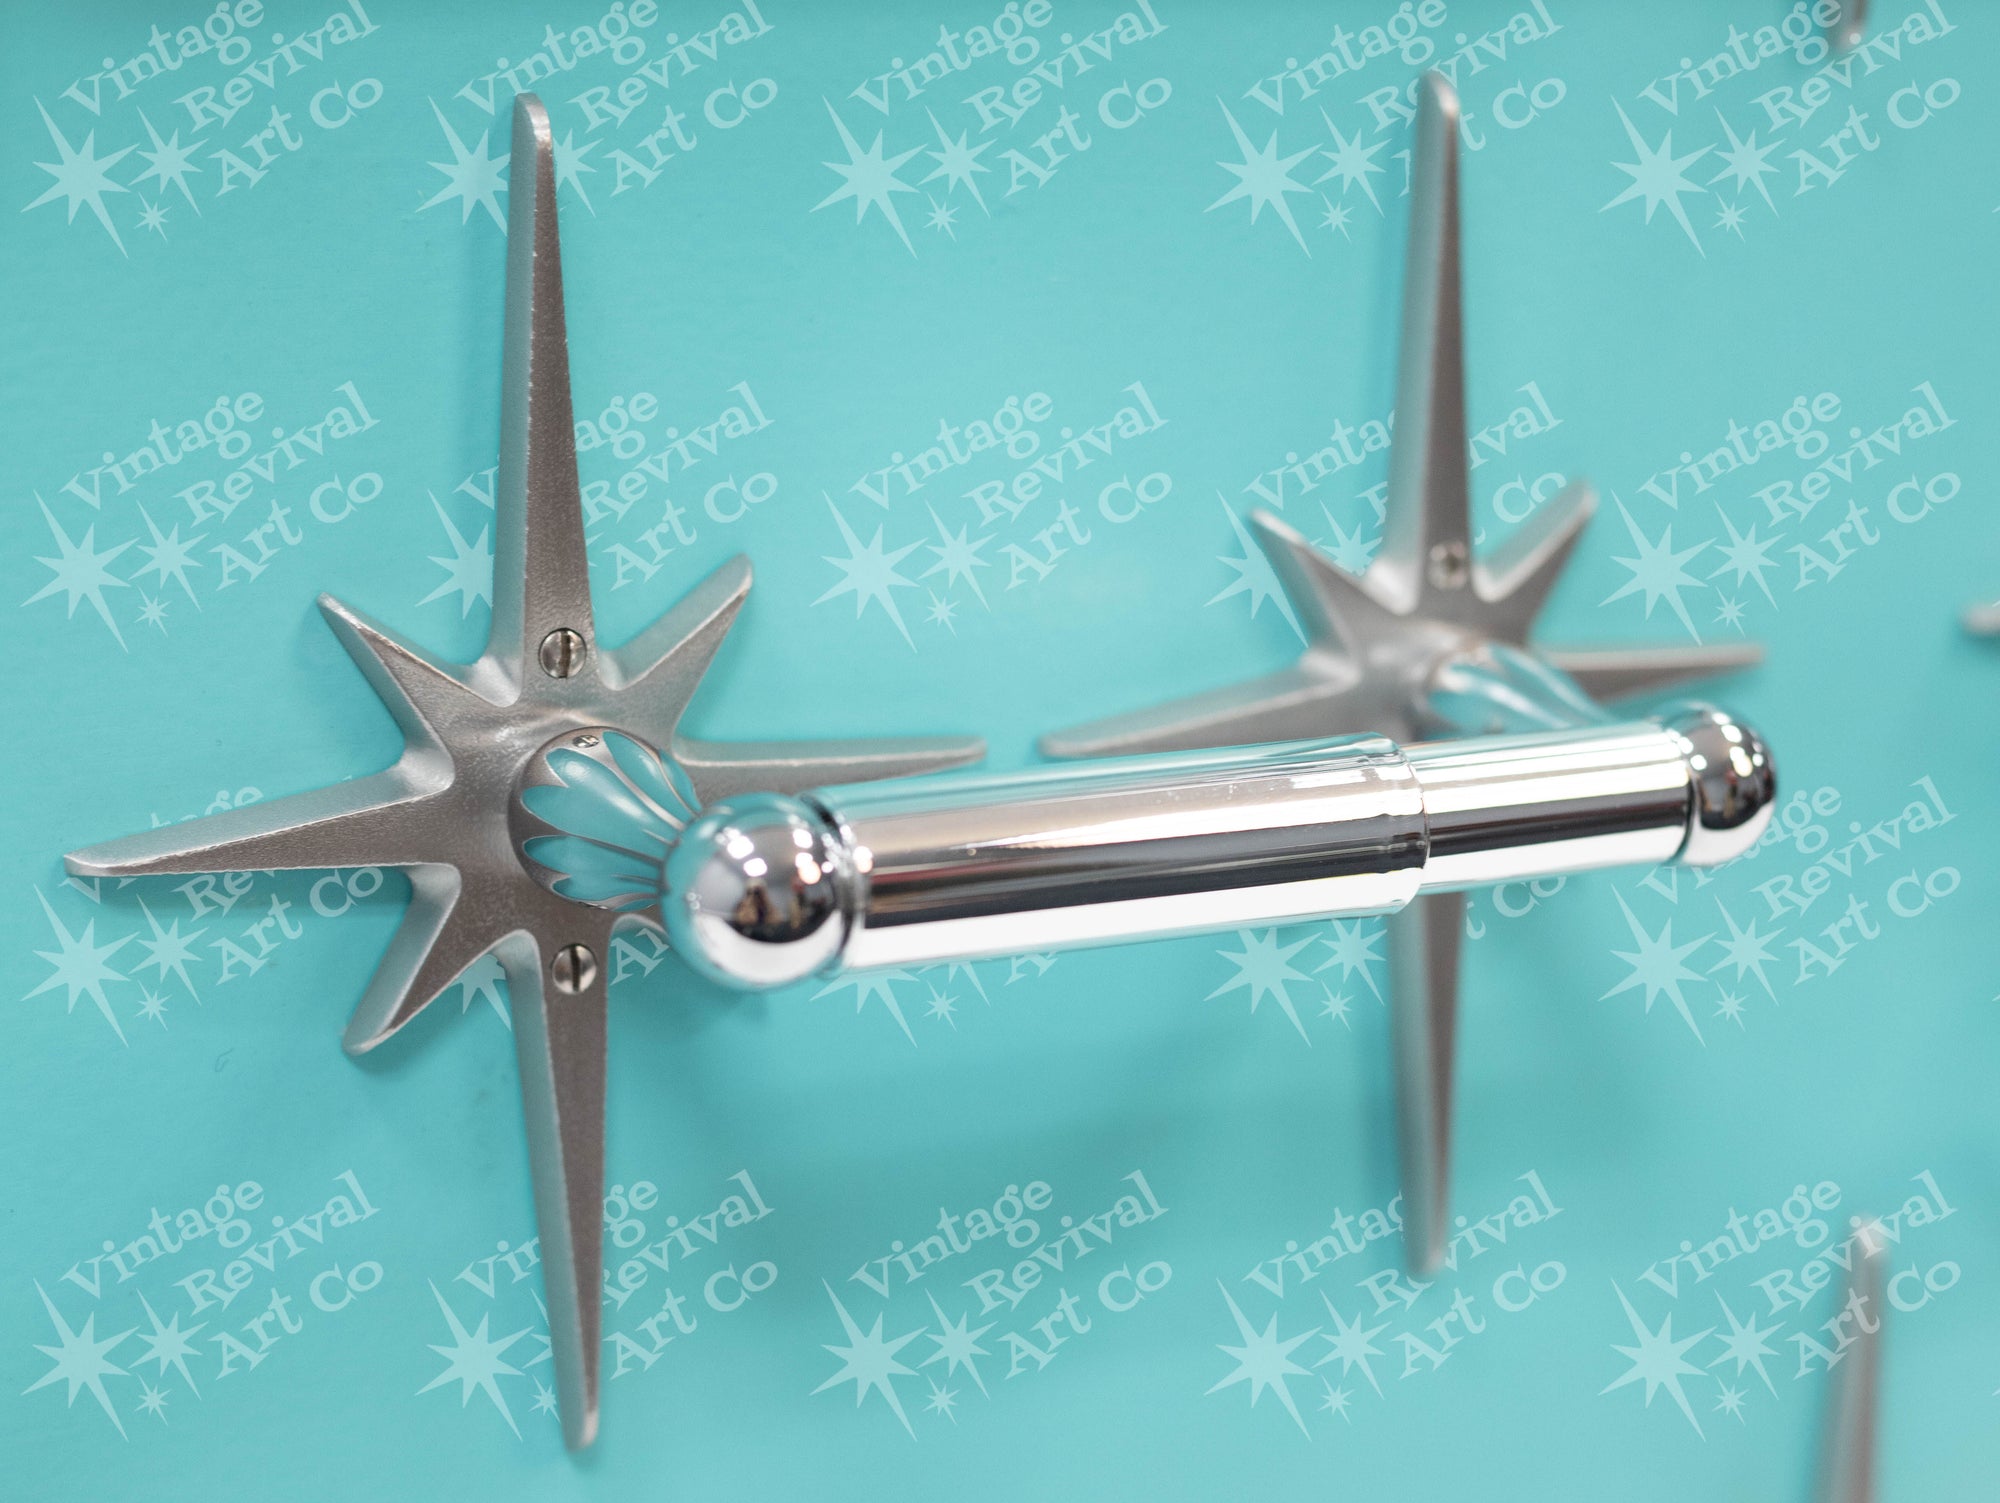 A standard toilet paper holder with two natural cast aluminum starbursts wear it attaches to the wall. They are silver with a metallic shine, and the hardware is chrome.